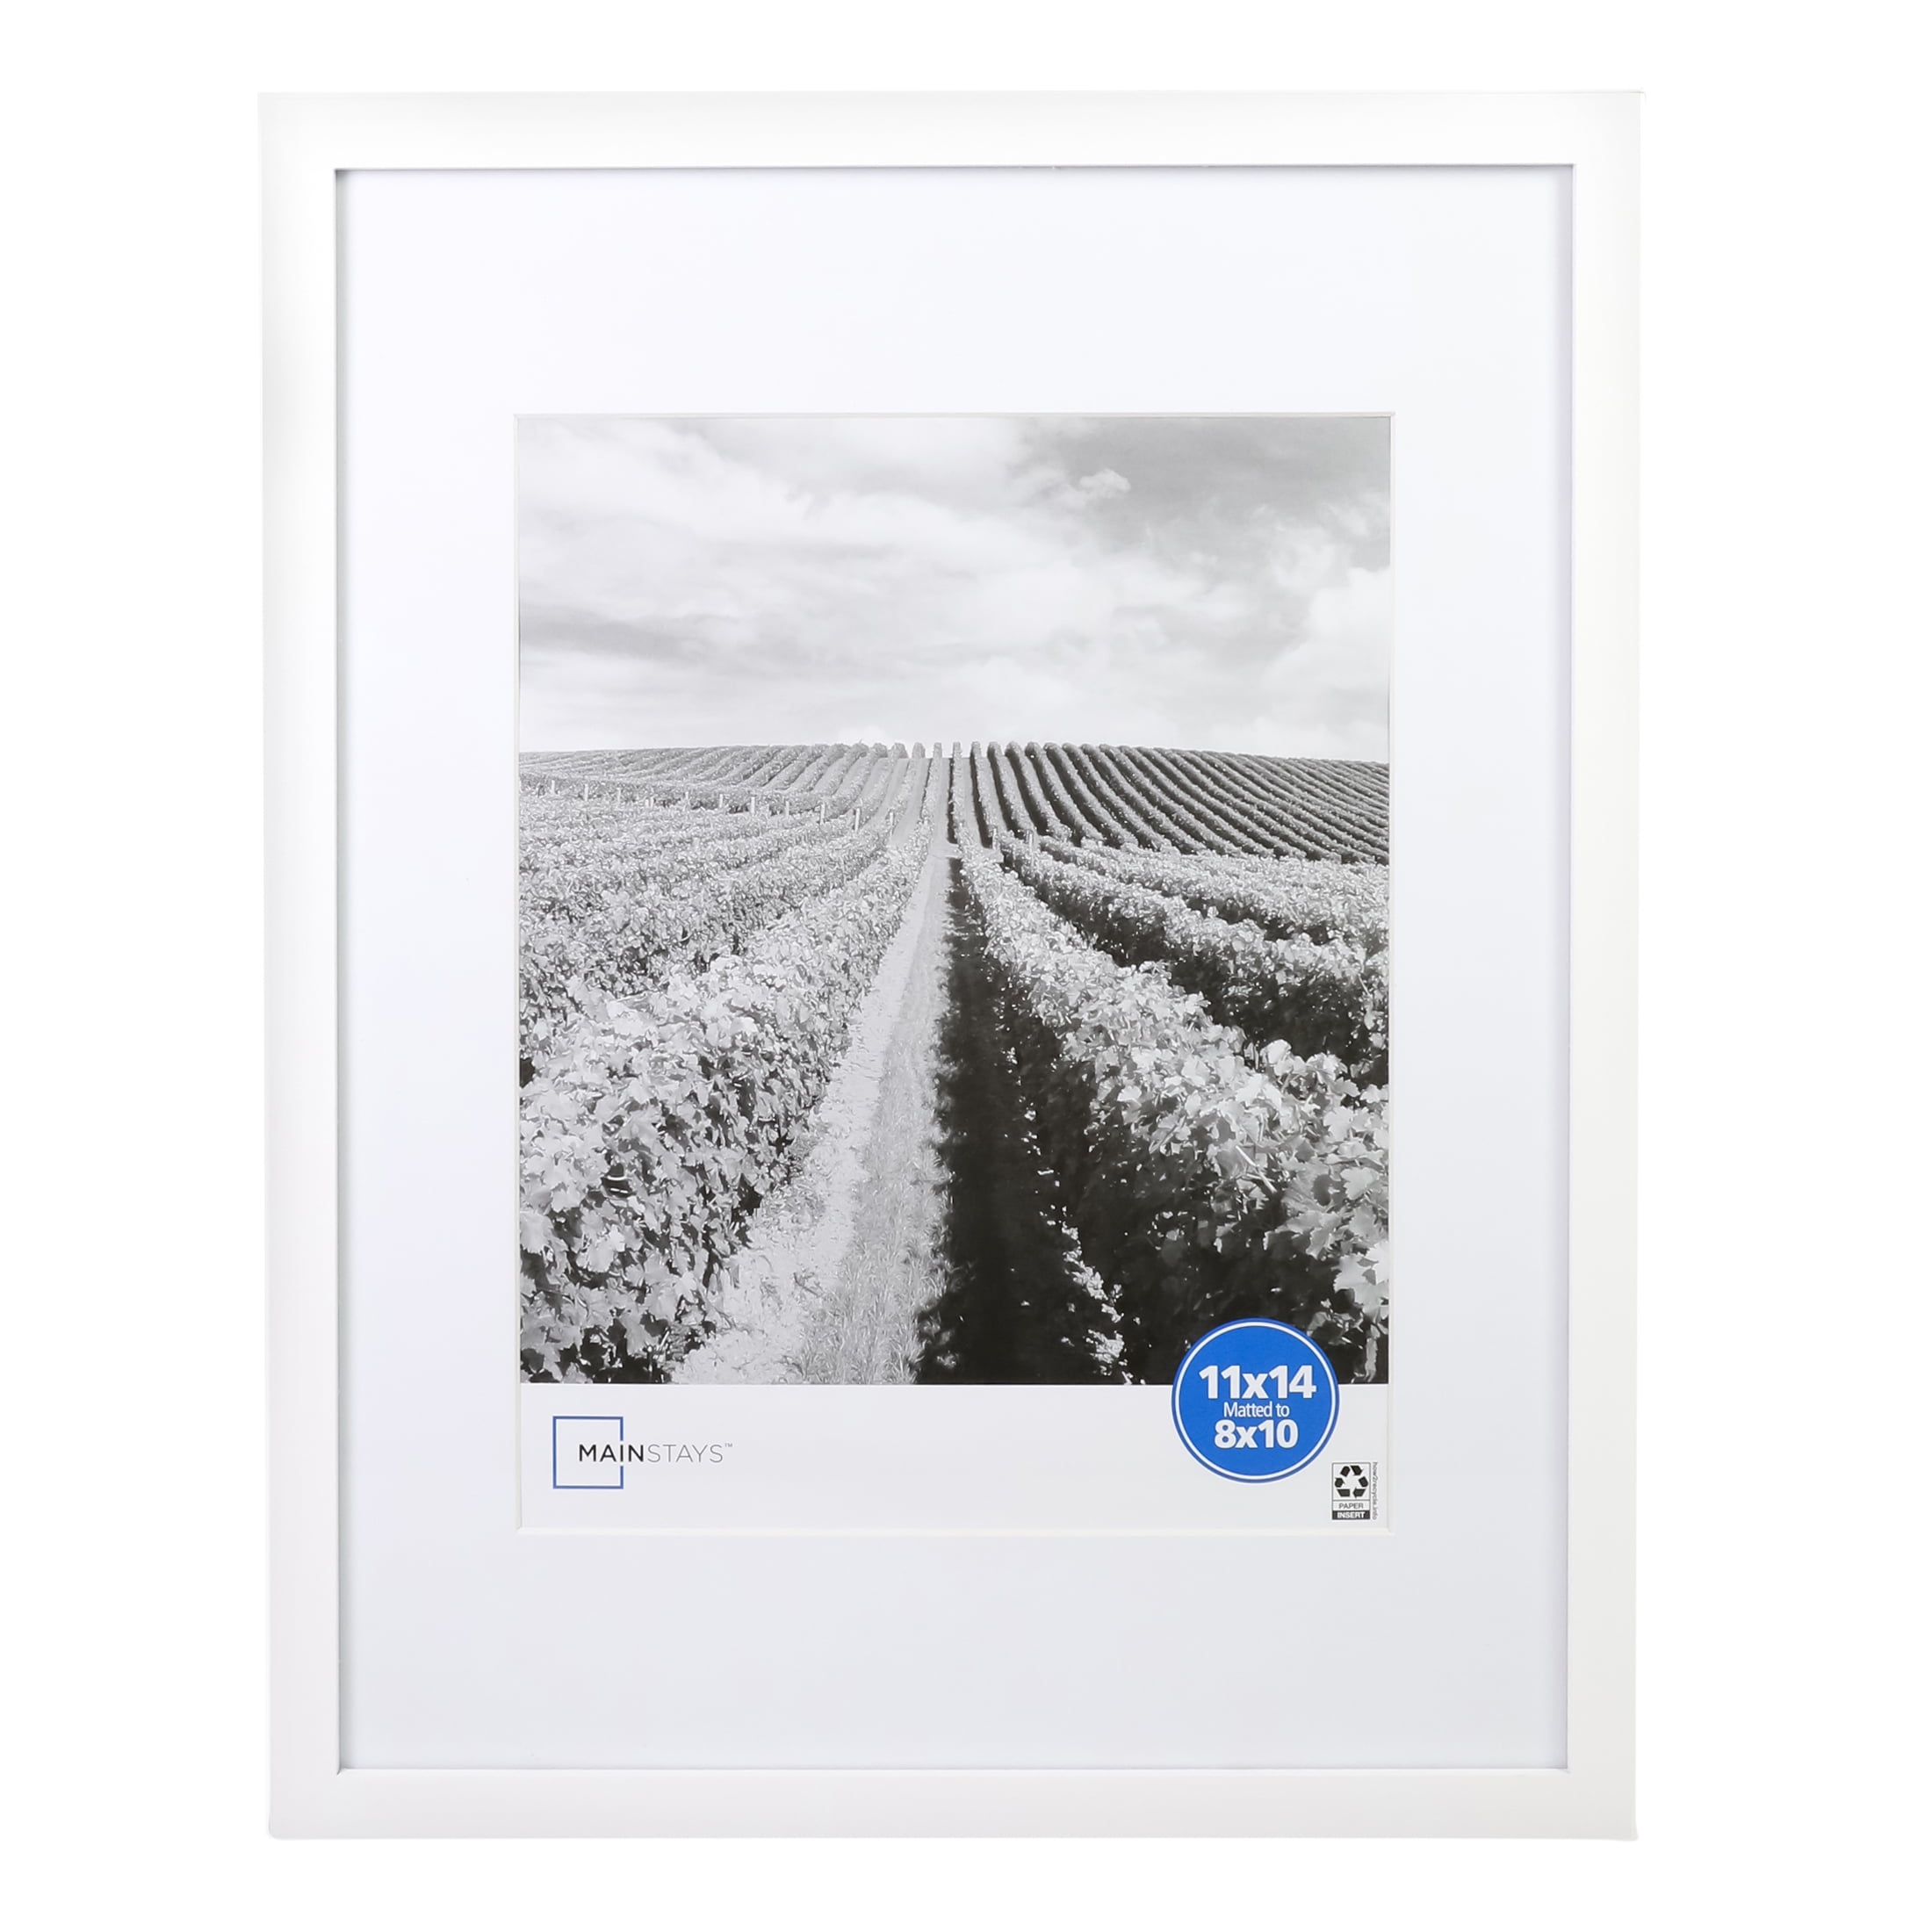 Mainstays 11x14 inch Matted to 8x10 inch White 0.5" Gallery Wall Picture Frame